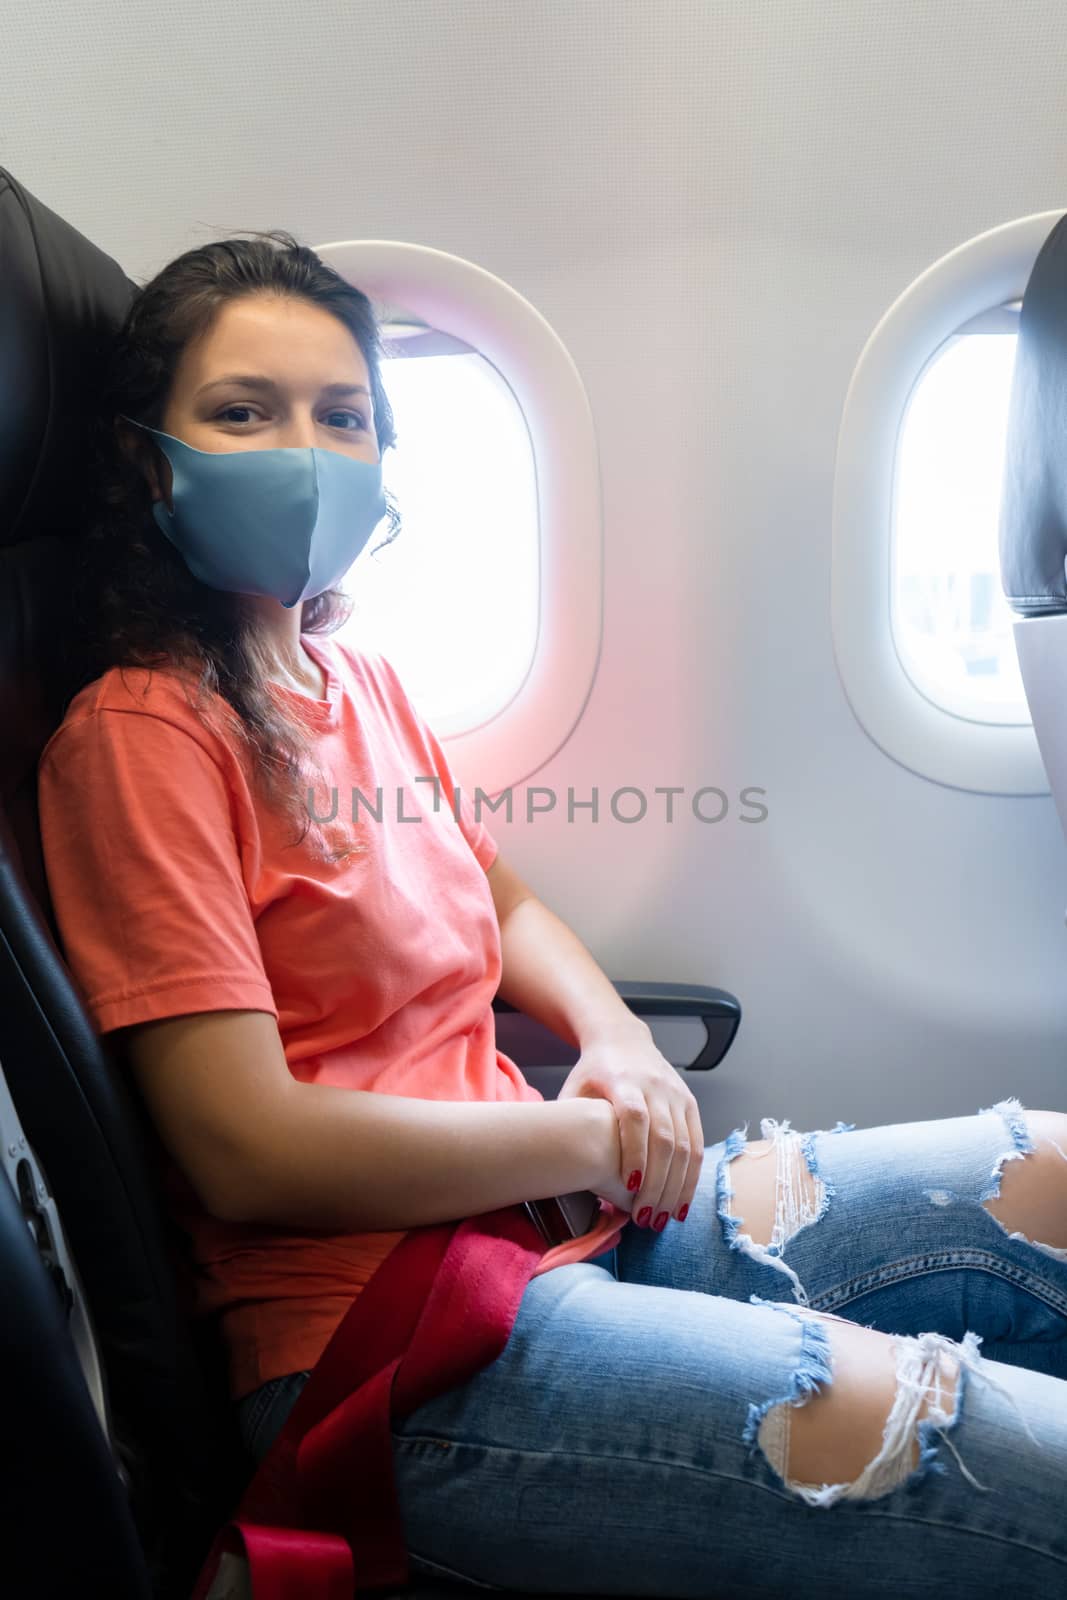 A girl in a medical mask on her face during a flight in the cabin. Air travel during a pandemic by Try_my_best